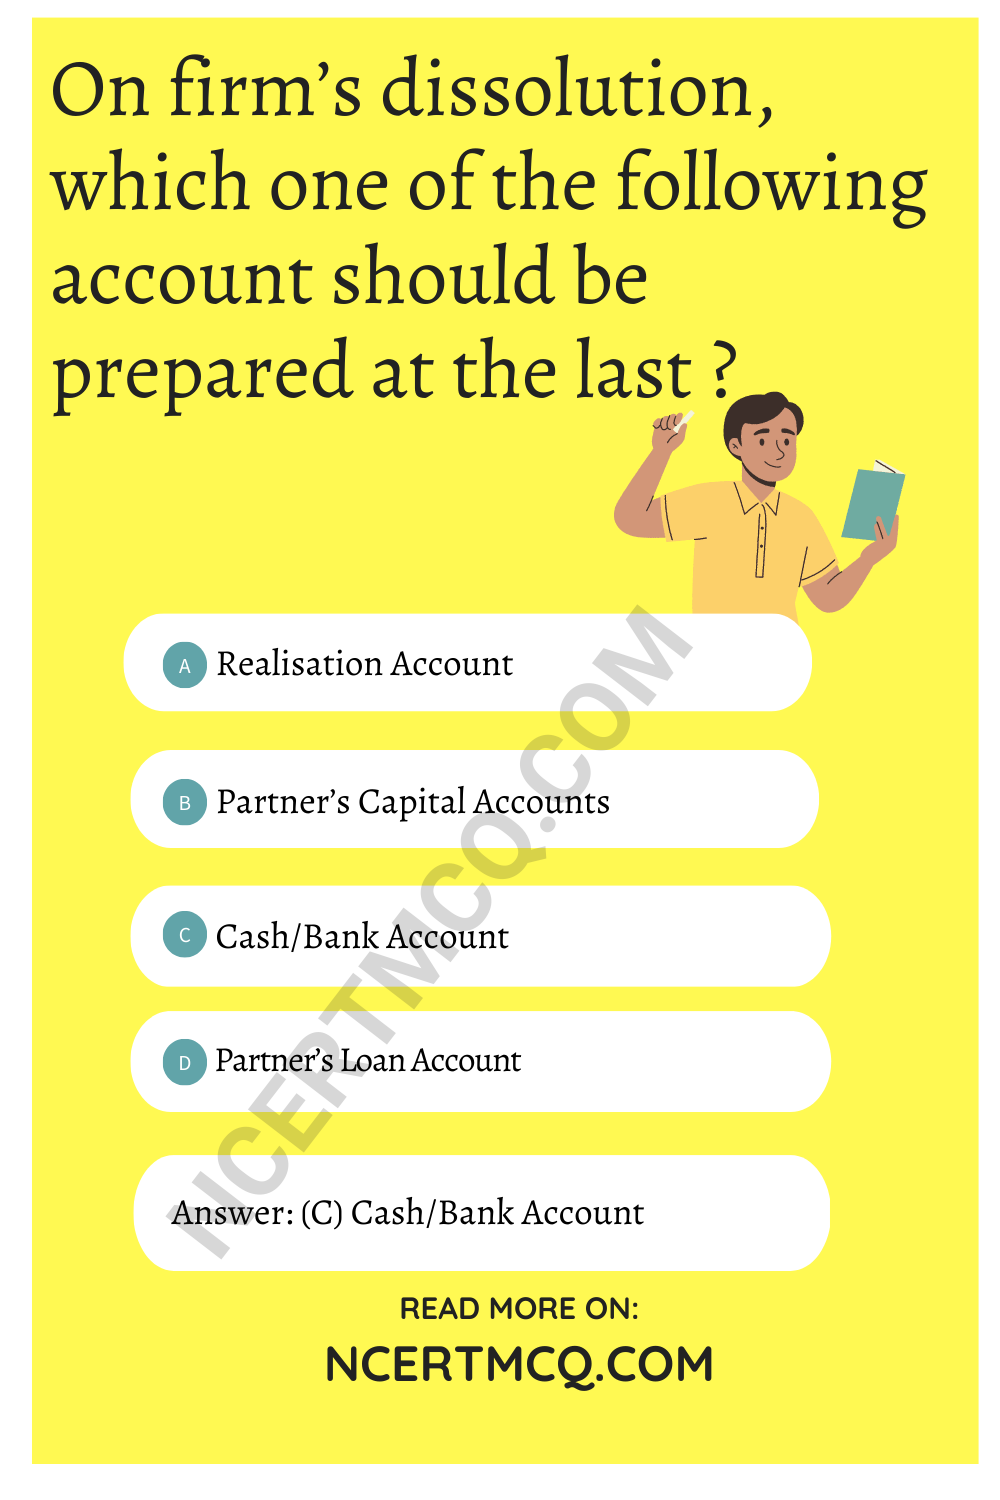 On firm’s dissolution, which one of the following account should be prepared at the last ?